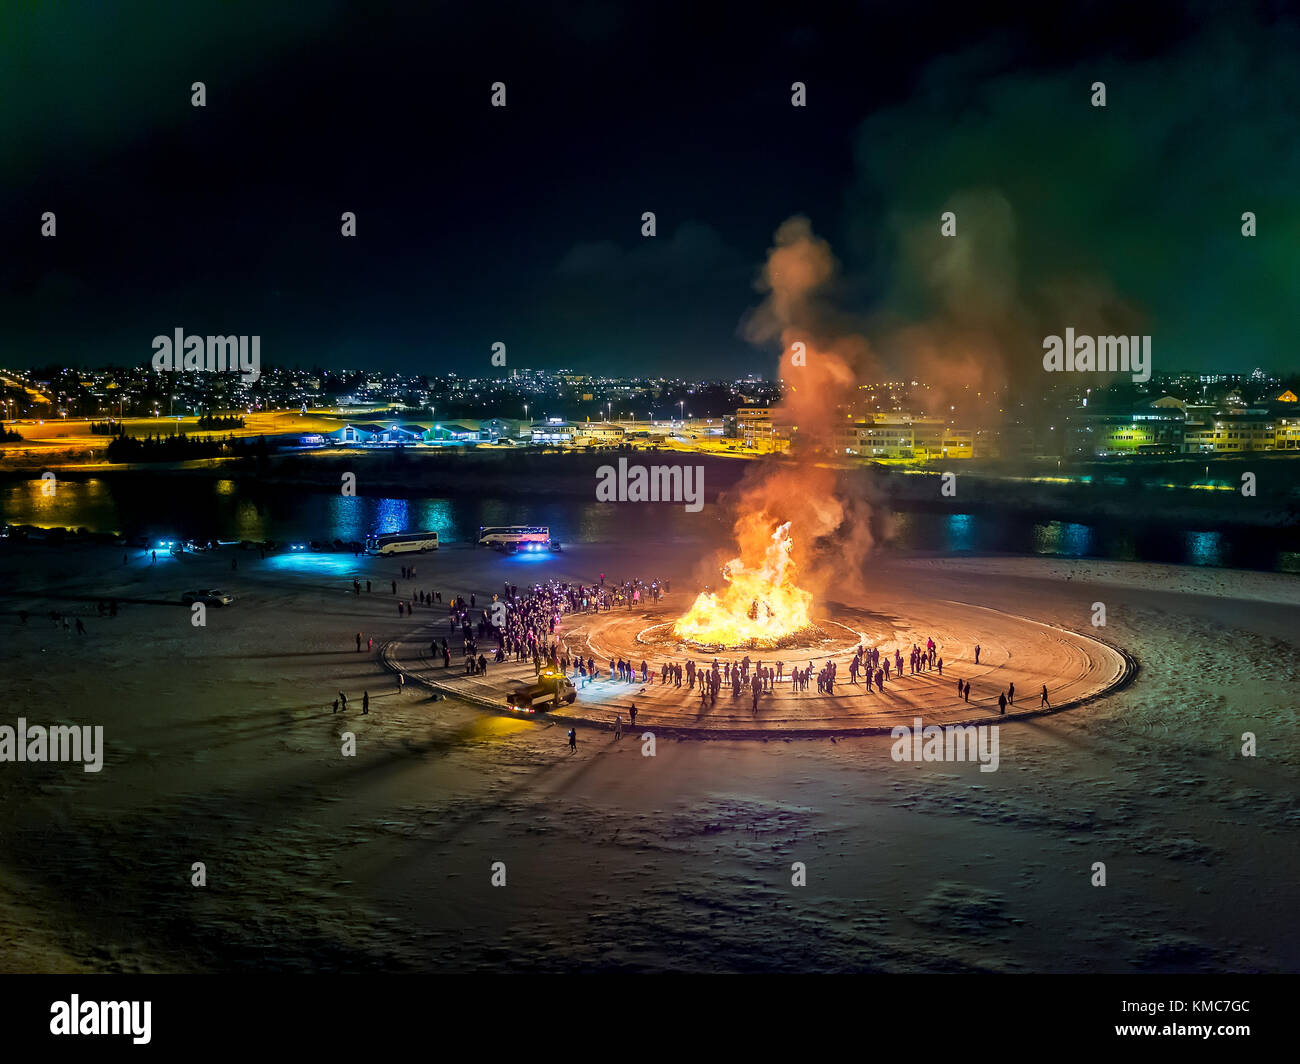 New Year´s Eve Celebration. Bonfires and fireworks on New Year´s is an annual event, Reykjavik, Iceland. This image is shot with a drone. Stock Photo